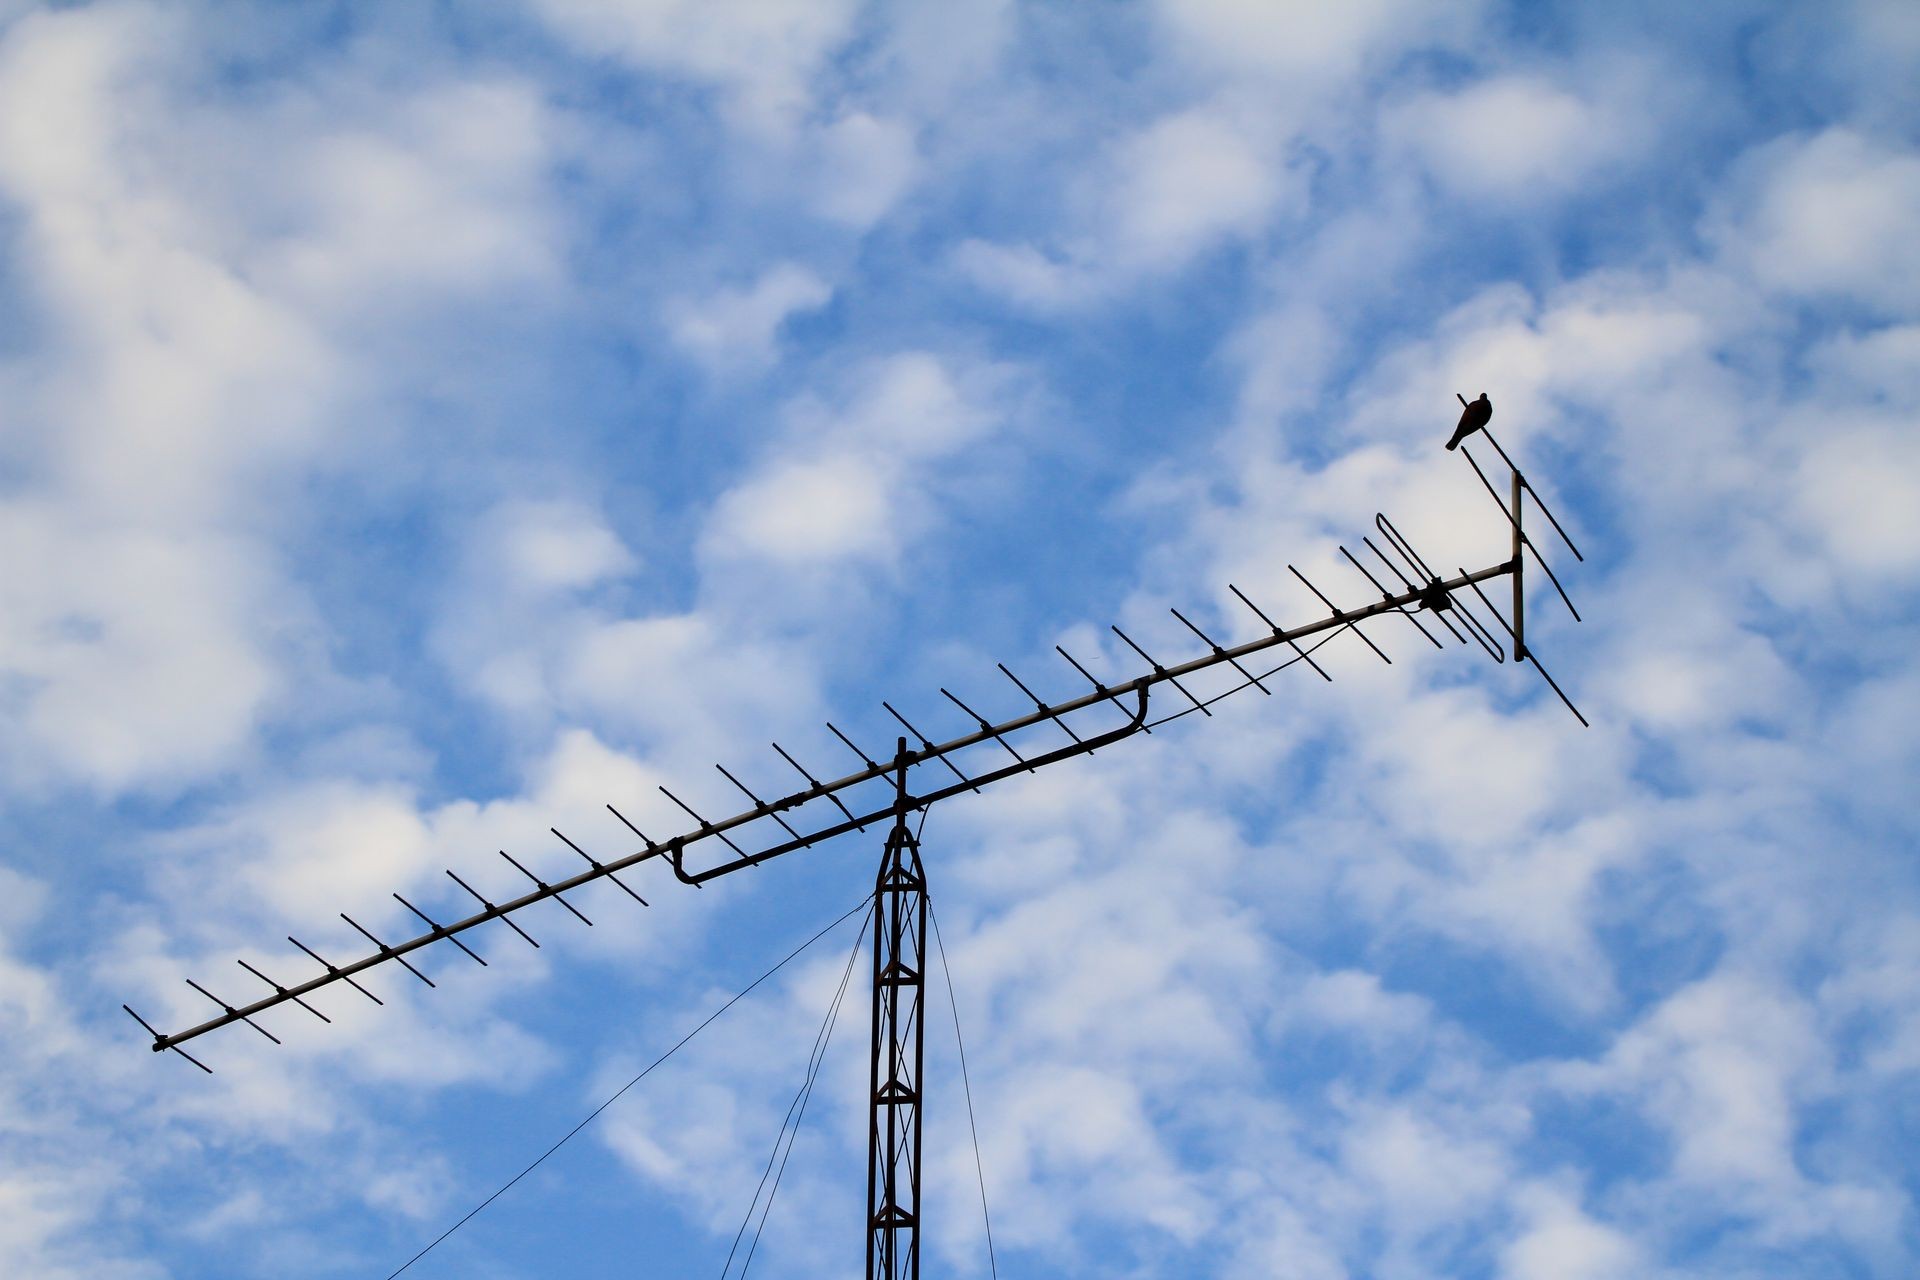 Birds with are on antenna. Television(TV) aerial on blue sky  and cloudy as a background